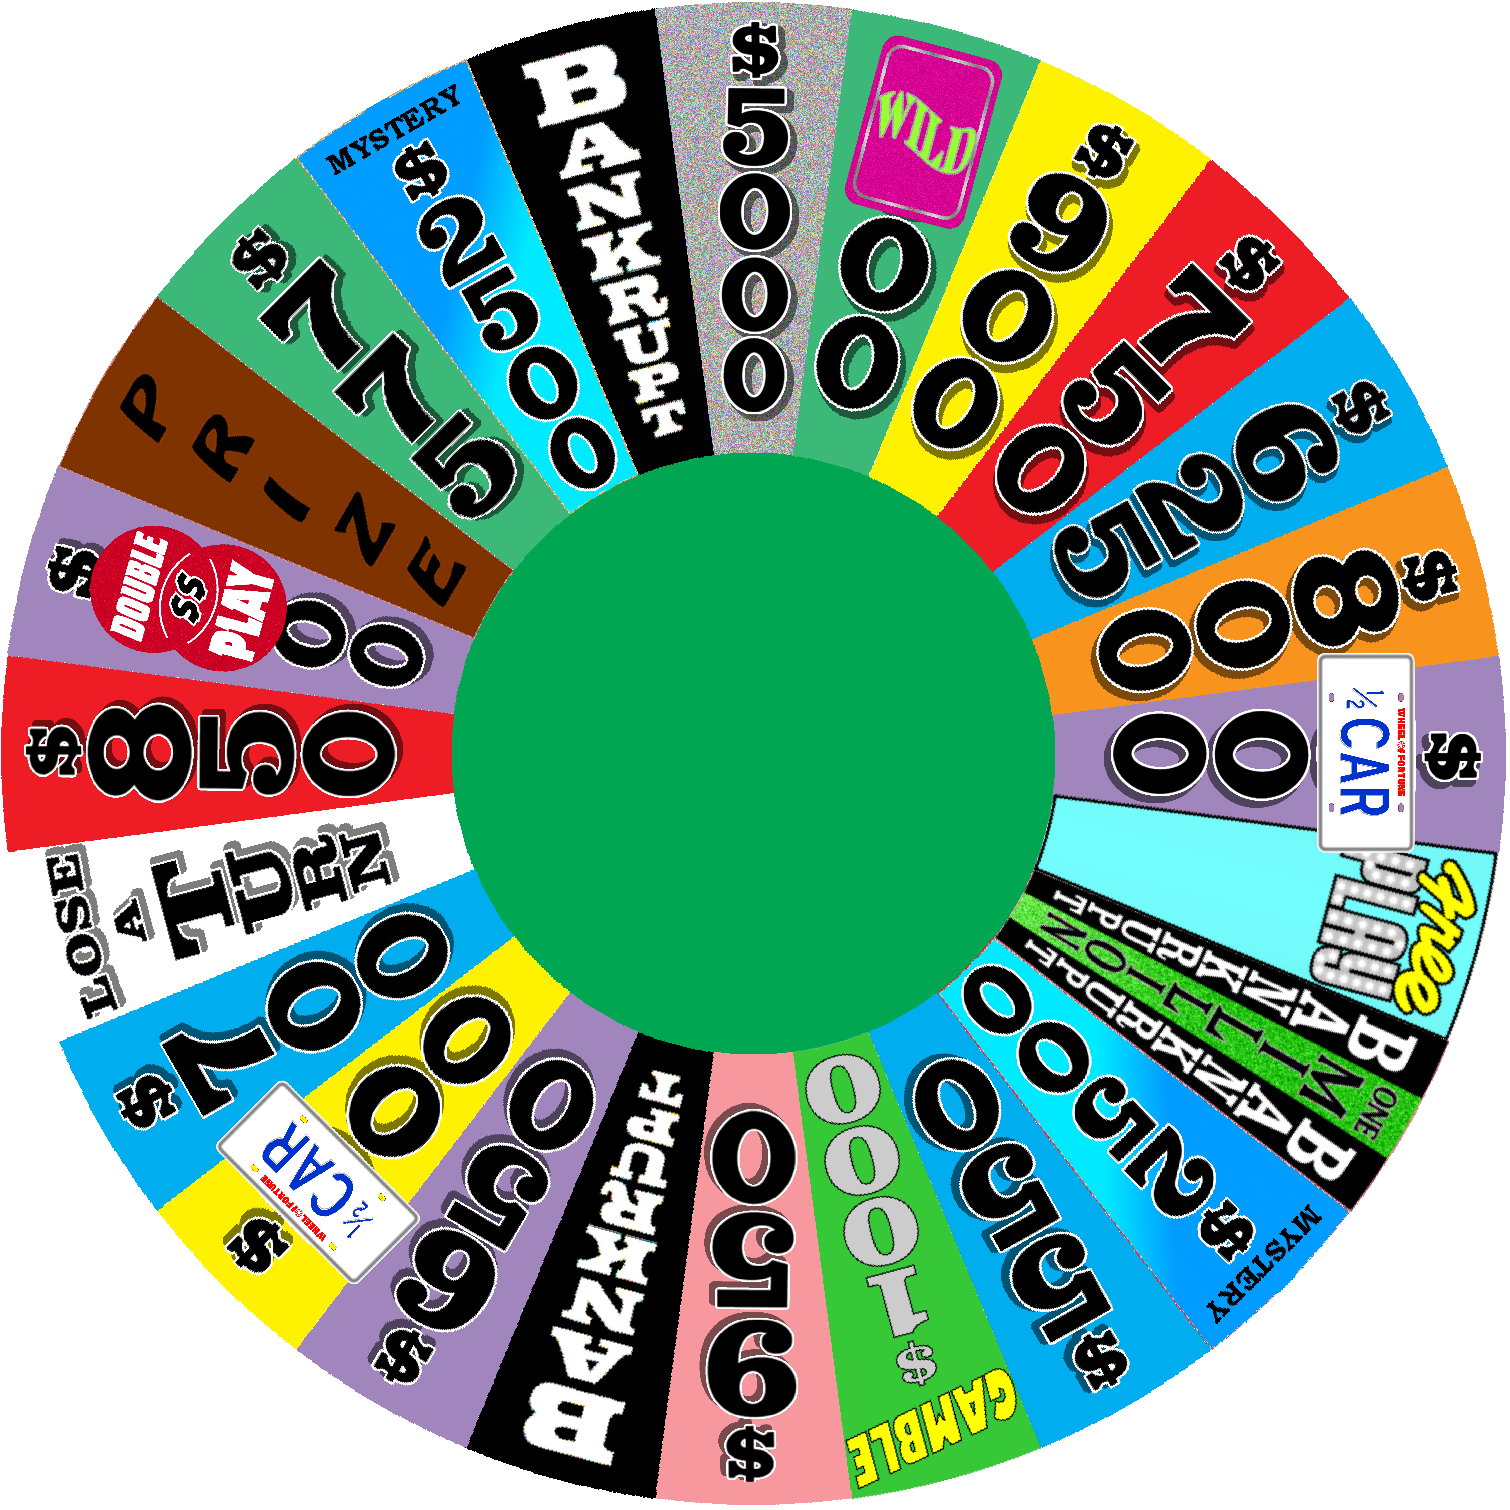 Mike2088's Wheel of Fortune Round 3 by LeafMan813 on DeviantArt